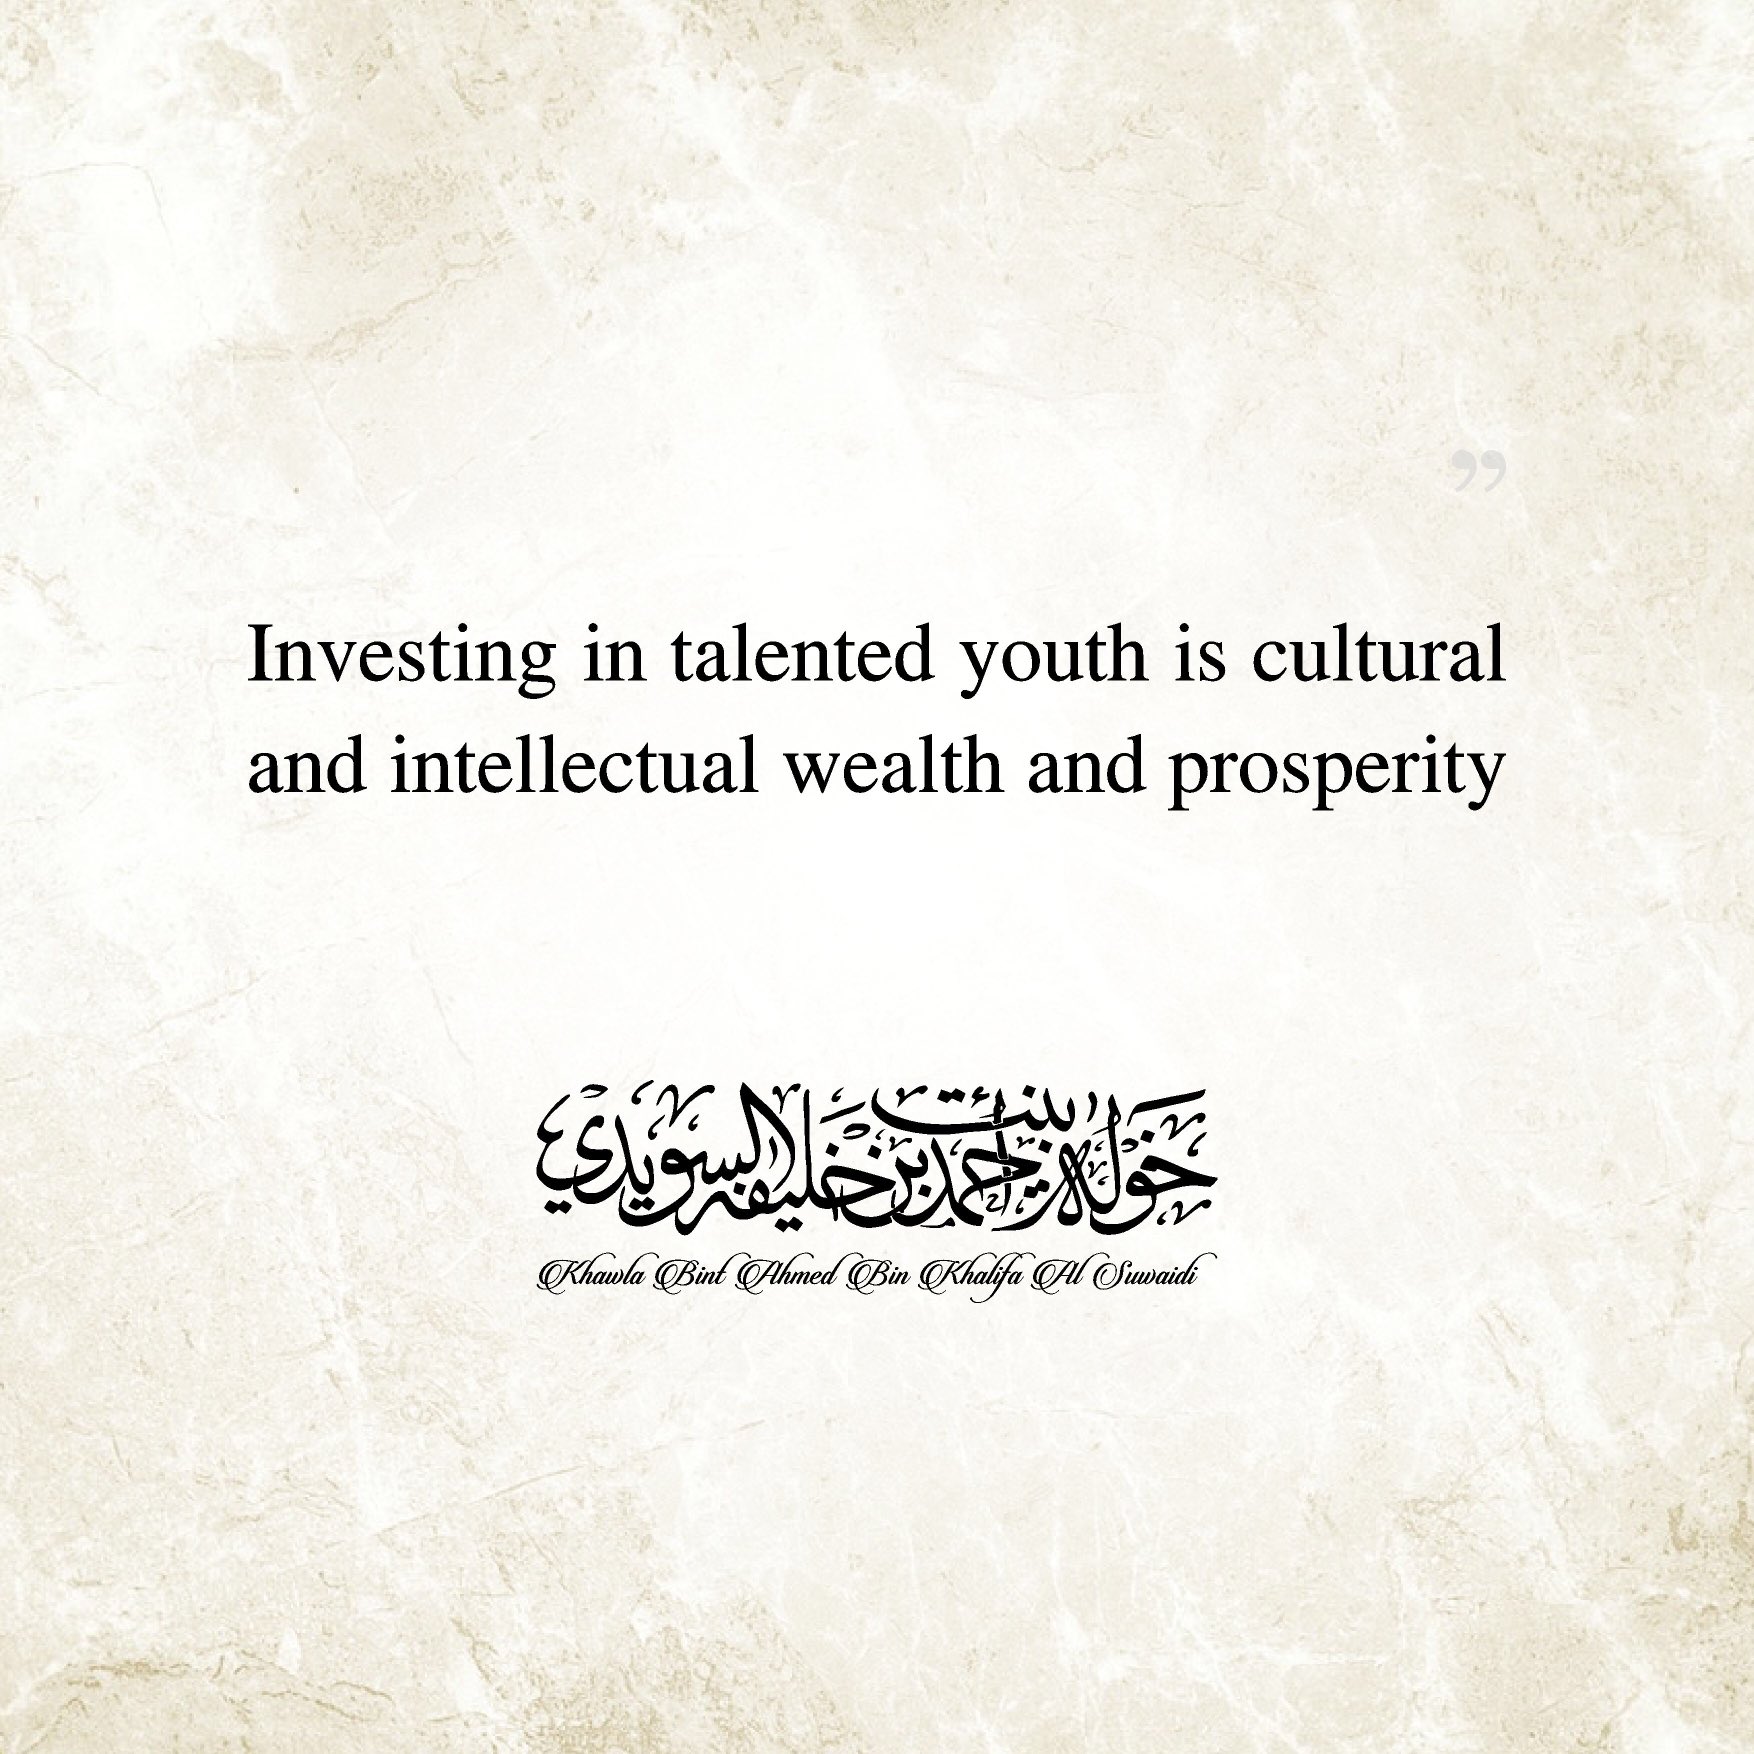 <p>
	Investing in talented youth is cultural and intellectual wealth and prosperity</p>
, Her Highness Sheikha Khawla Bint Ahmed Khalifa Al Suwaidi,Khawla Sheikha, Sheikha Khawla,خوله, Khawla Suwaidi,Khawla, khawla al sowaidi,khawla sowaidi,Khawla Al Suwaidi,National Poetry, Poetry, Arabic poems, Arab poet,Arab calligrapher,Arab artist,خوله السويدي, khawla alsuwaidi,khawla al suwaidi, peace and love exhibition at saatchi gallery london, peace & love,arabic poem,arabic poetry,peace and love, peace ,love, sheikha khawla bint ahmed bin khalifa al suwaidi,sheikha khawla bint ahmed bin khalifa al suwaidi,khawla  al suwaidi,khawla  alsuwaidi, khawla, خوله السويدي , خوله بنت احمد بن خليفه السويدي , خوله   احمد   السويدي  